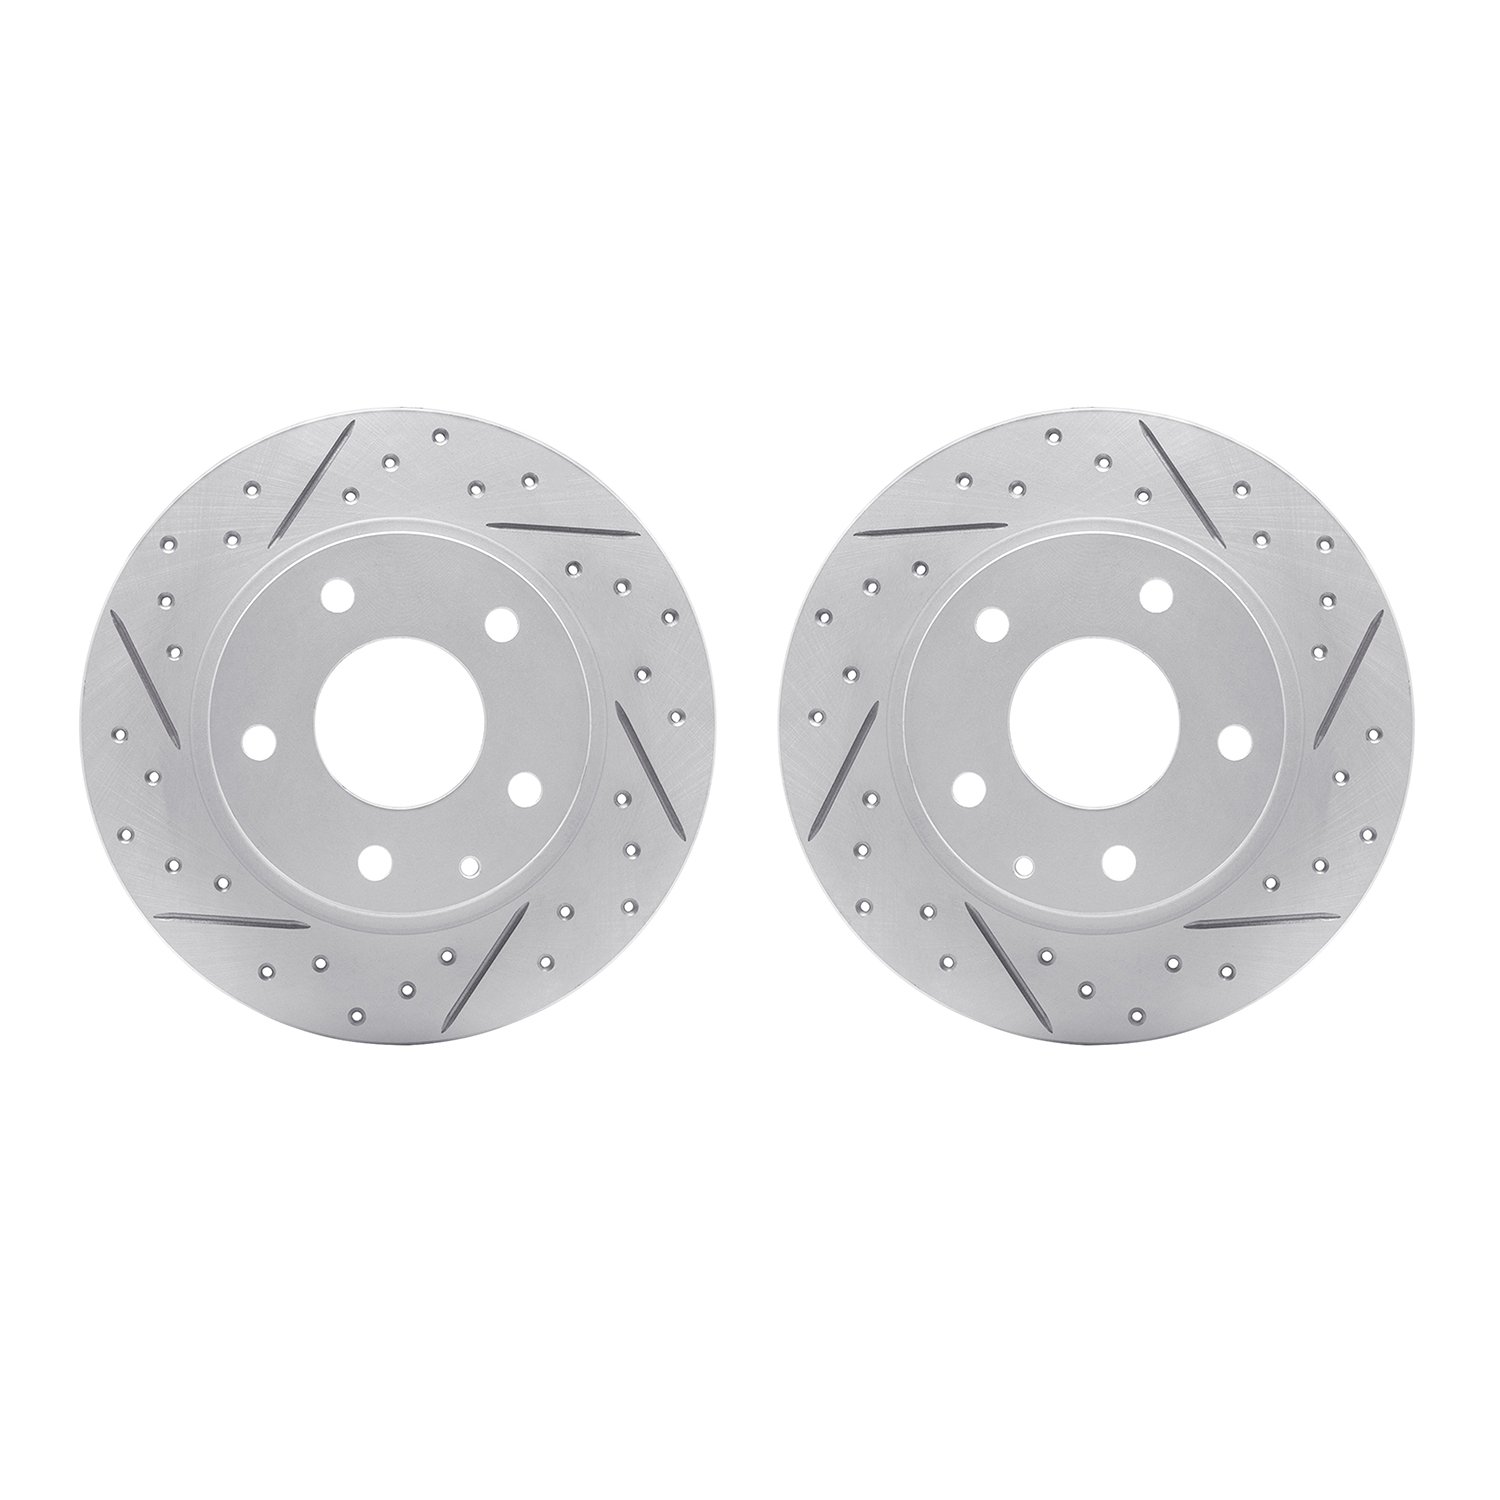 2002-80032 Geoperformance Drilled/Slotted Brake Rotors, 2014-2016 Ford/Lincoln/Mercury/Mazda, Position: Rear